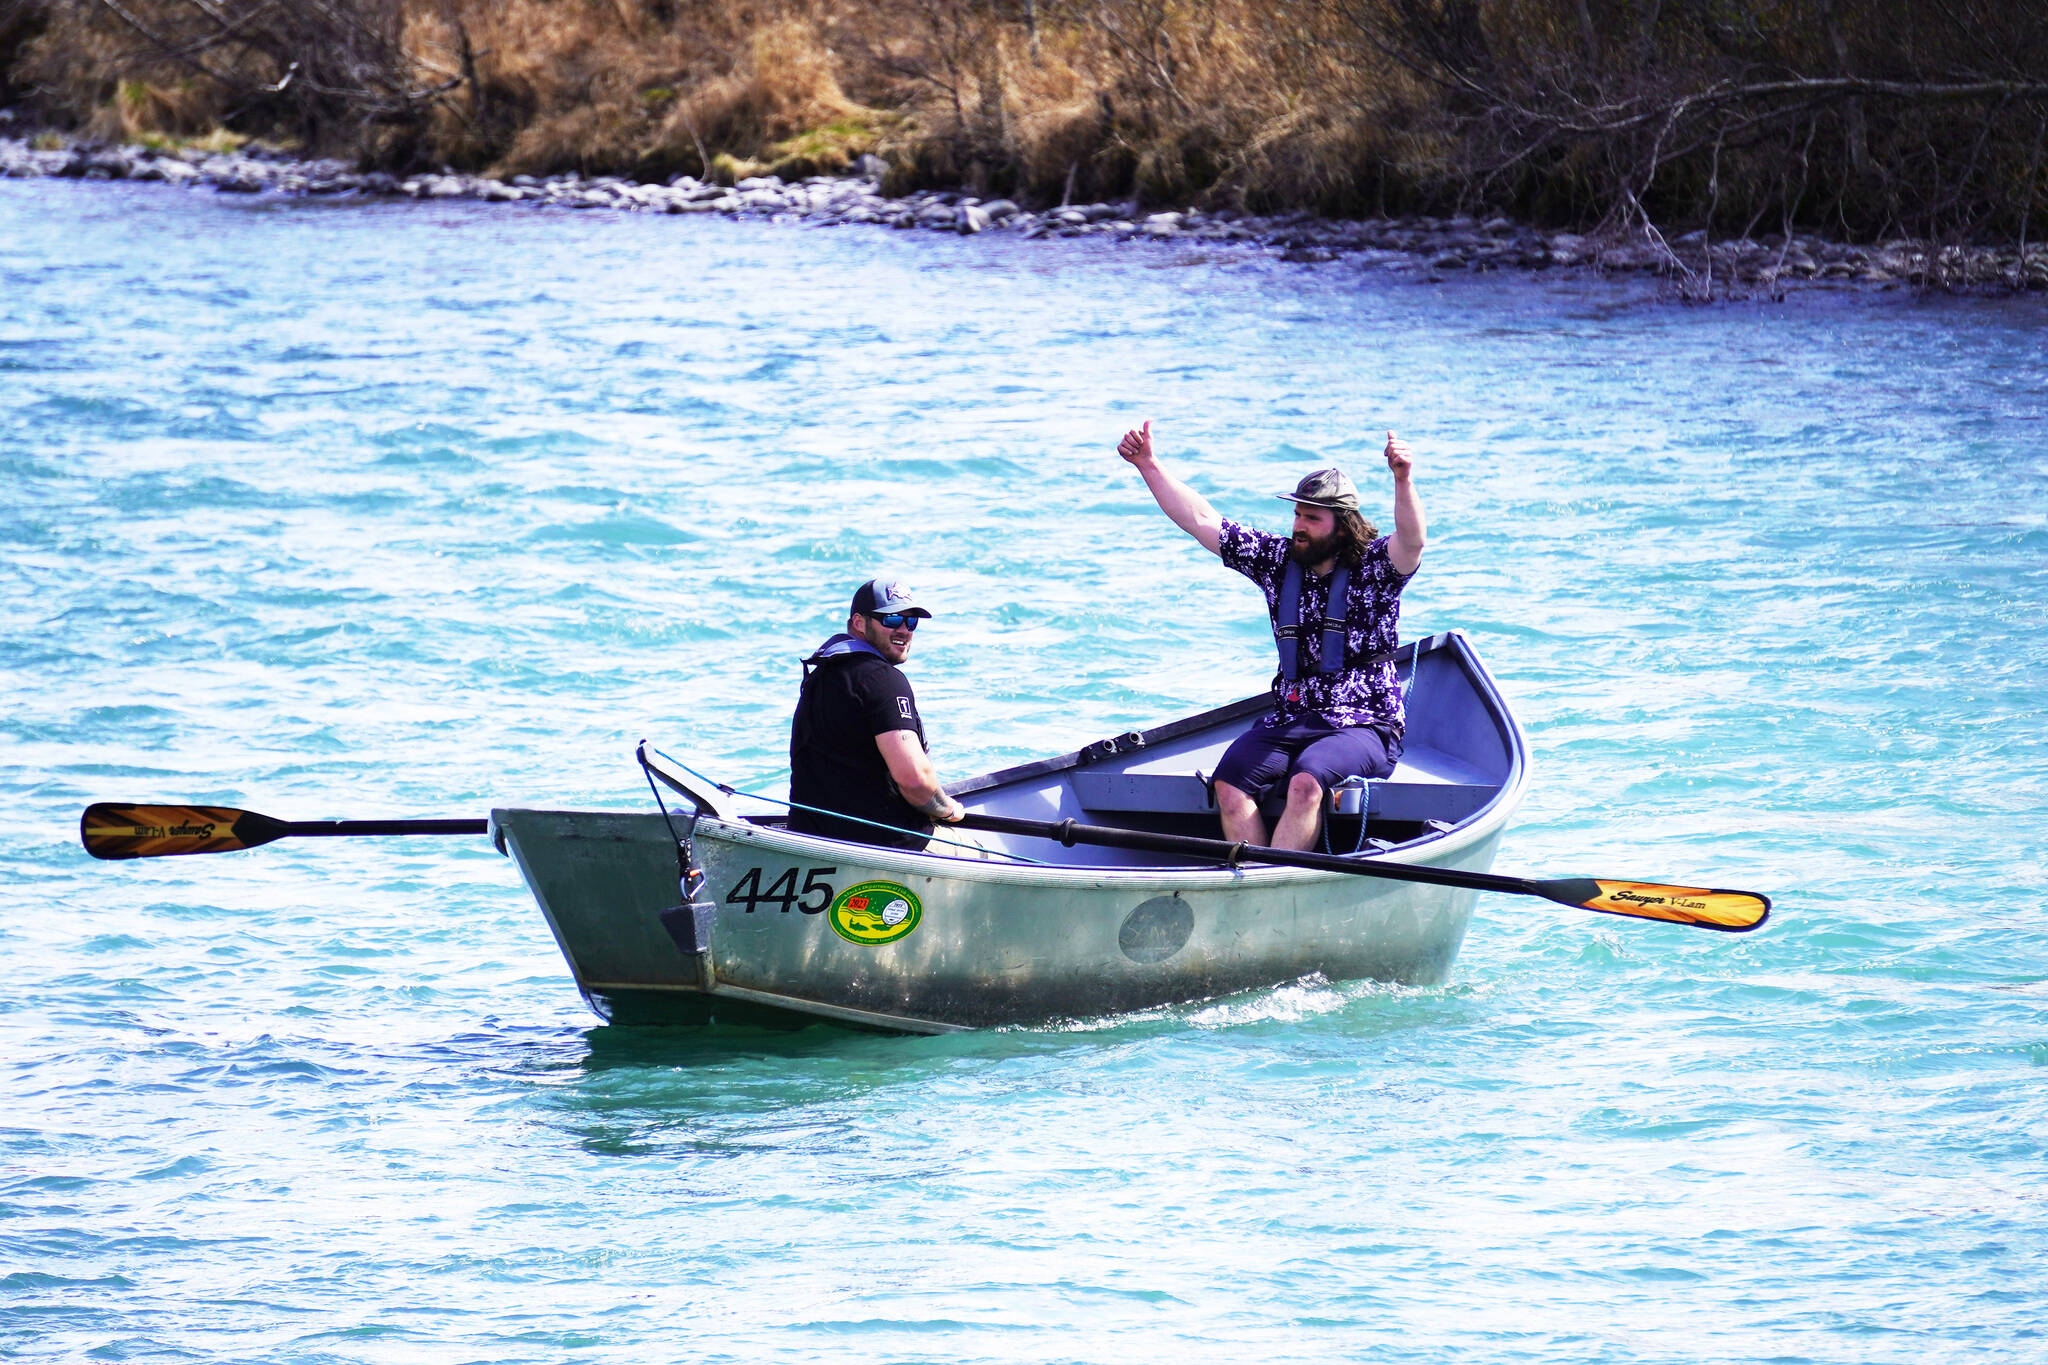 Contestants celebrate after completing the 16th Annual Cooper Landing Drift Boat Regatta at Sportsman’s Landing in Cooper Landing, Alaska, on Saturday, May 20, 2023. (Jake Dye/Peninsula Clarion)